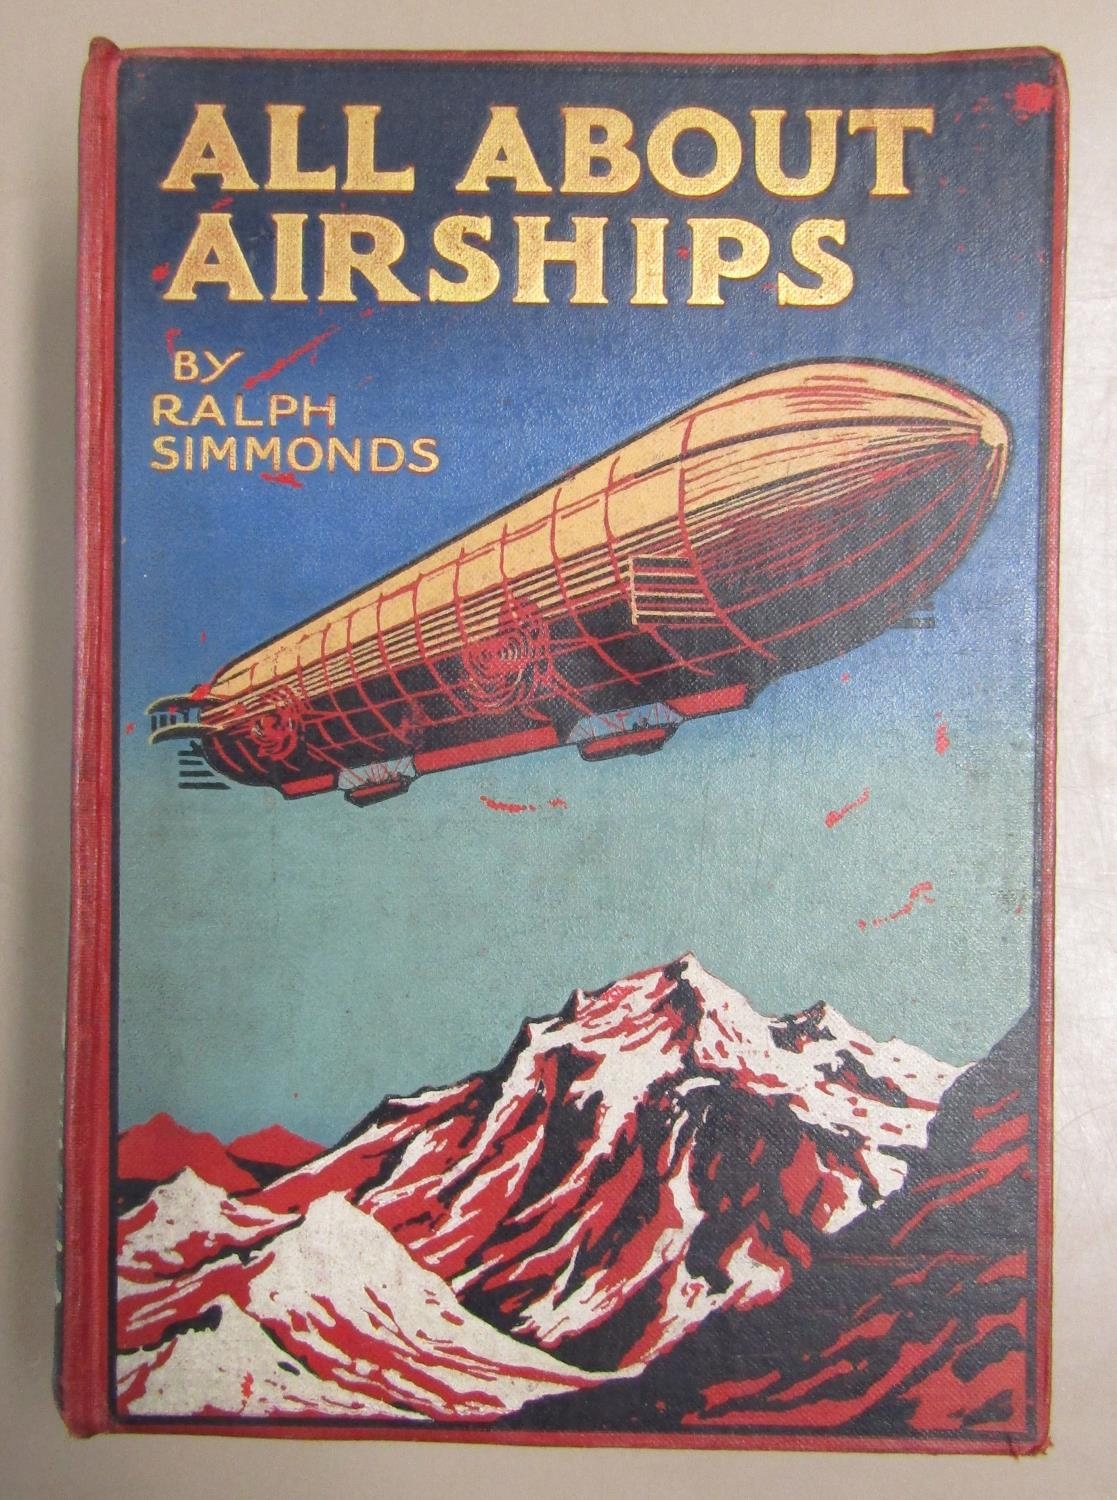 Edwardian boy's books with decorated spines including All About Airships by Ralph Simmonds 1918 - Image 2 of 4